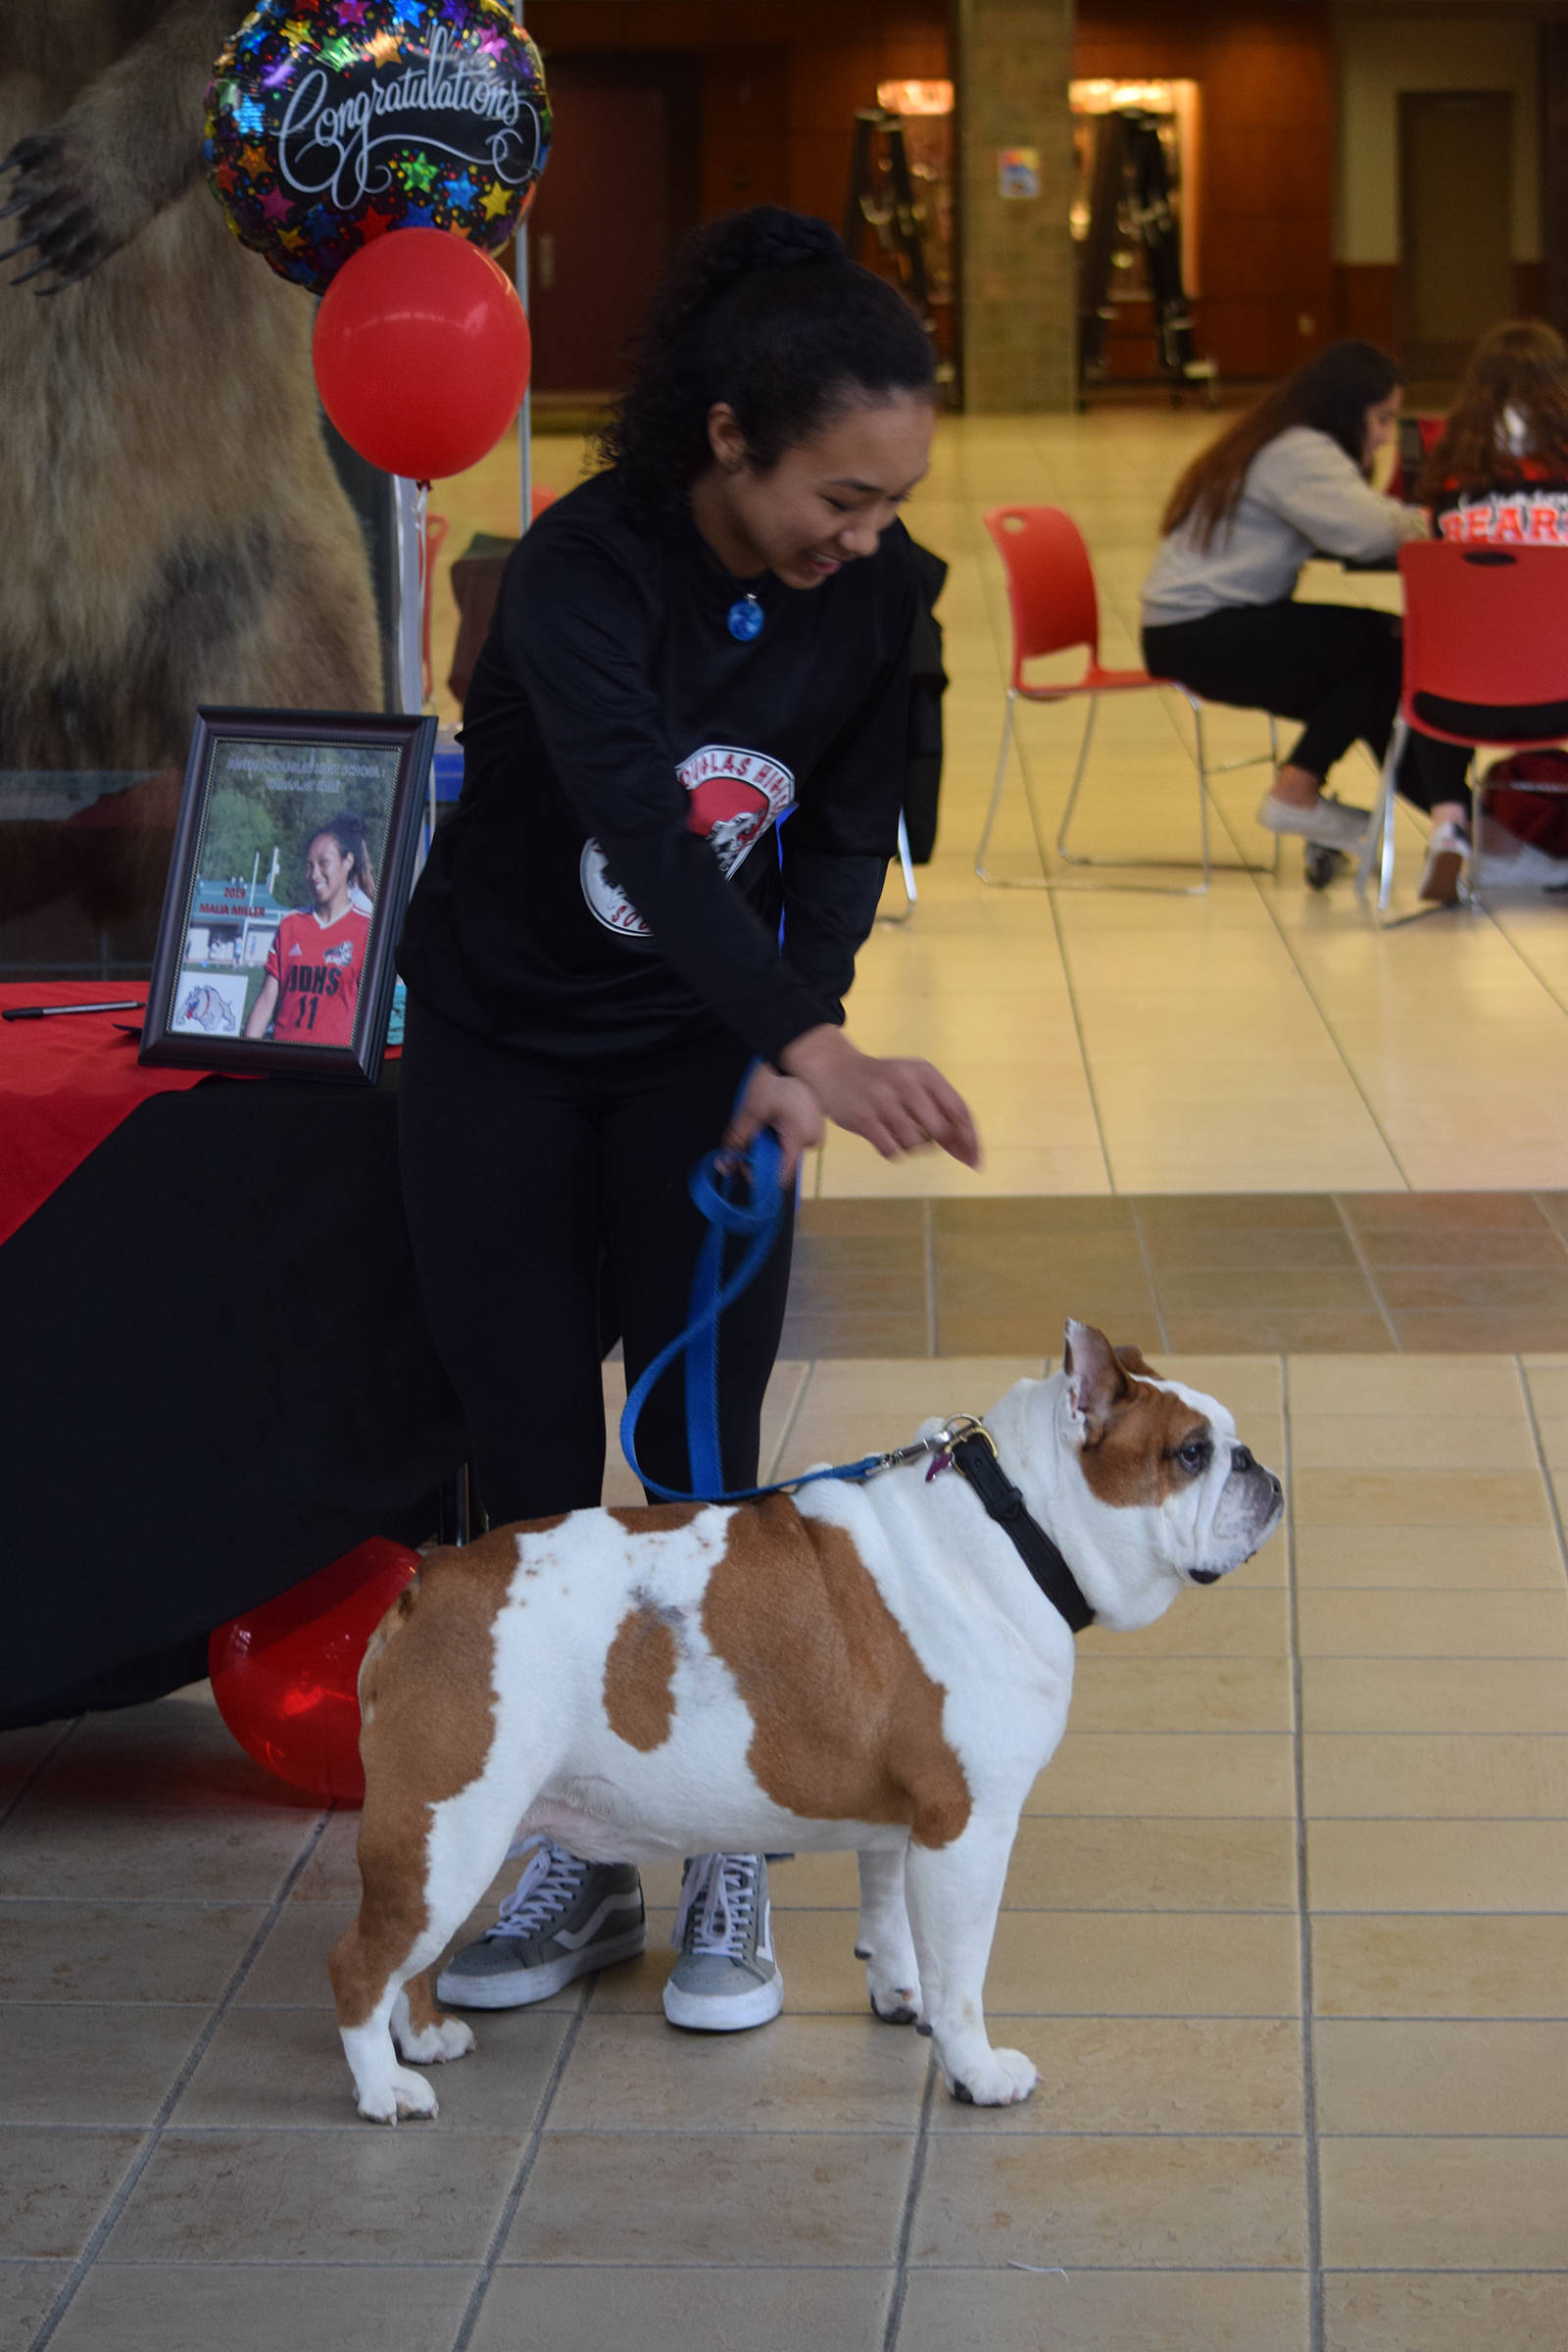 Juneau-Douglas High School senior Malia Miller tries to get the attention of a friend’s bulldog, “Wallace.” Miller signed a National Letter of Intent with the Bellevue College Bulldogs at the JDHS commons on Thursday, March 14, 2019. (Nolin Ainsworth | Juneau Empire)